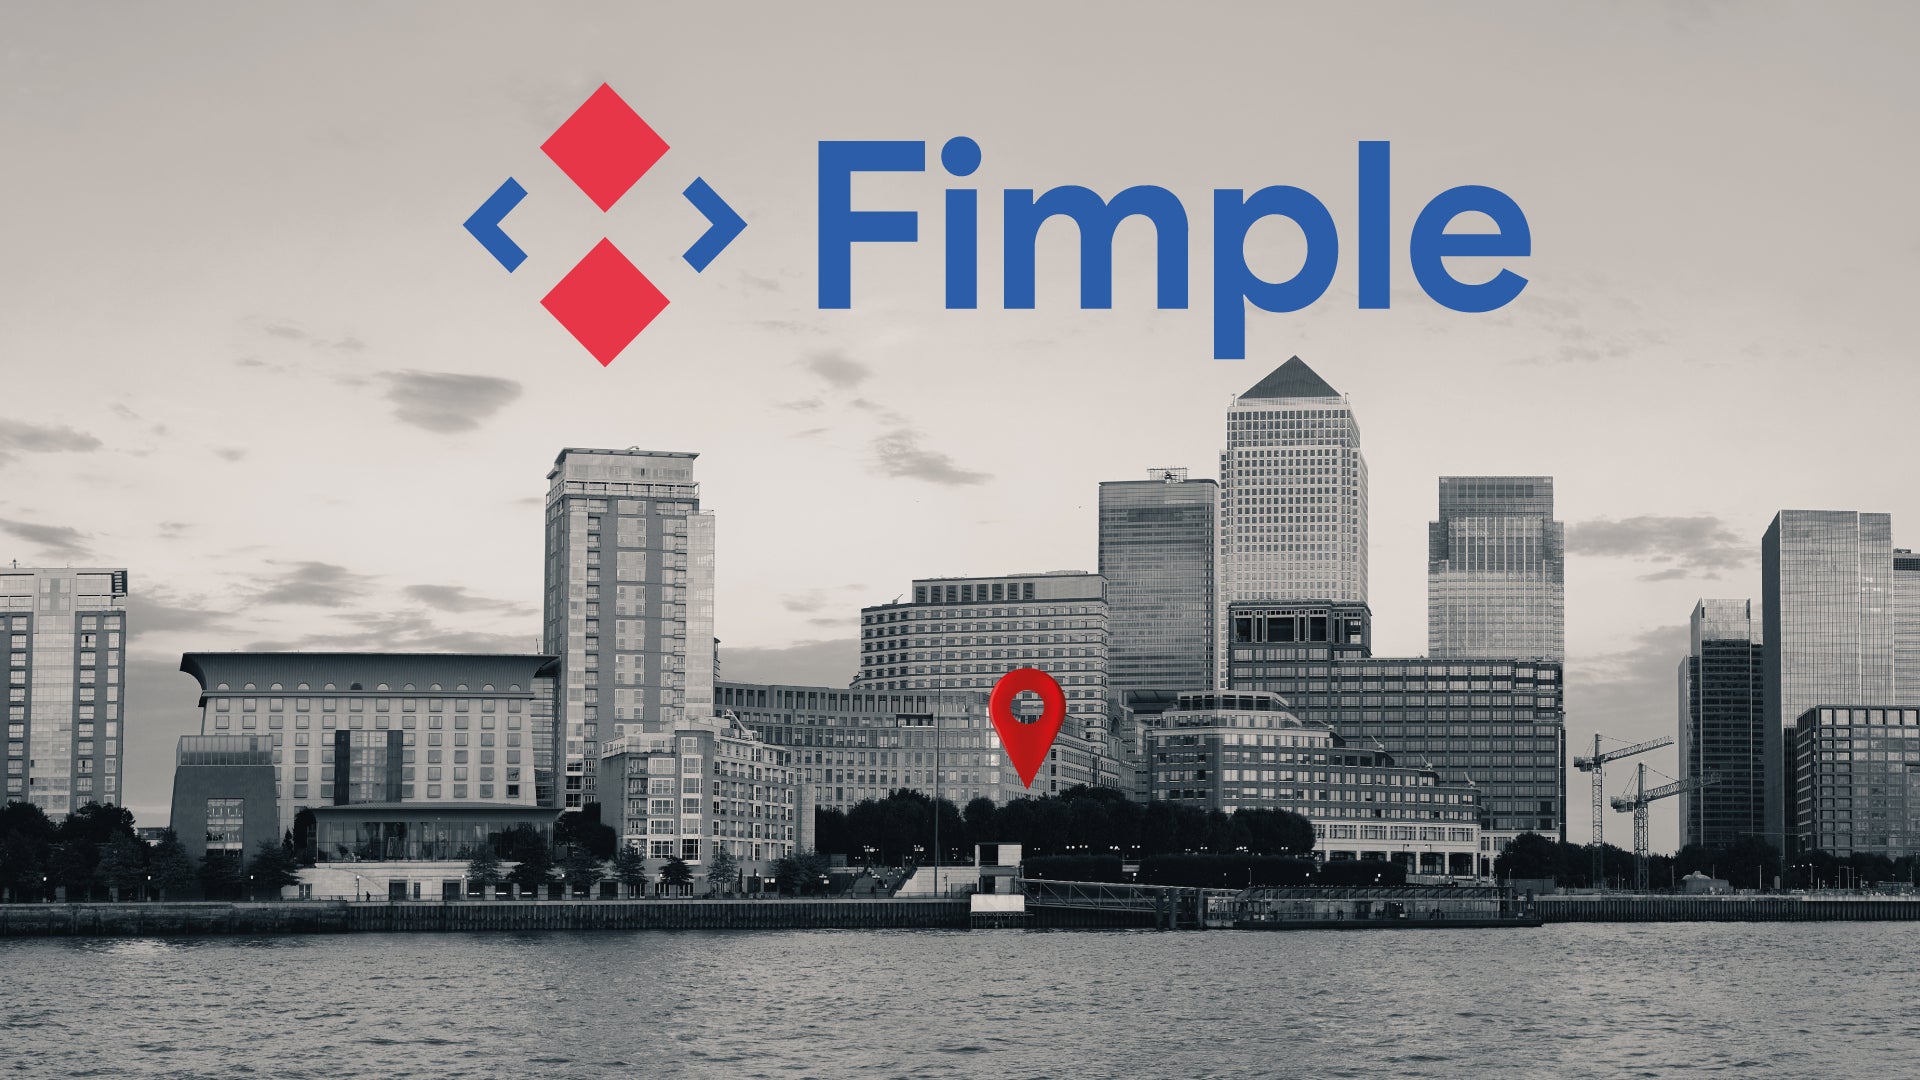 Turkey’s fintech Fimple set to scale up global presence